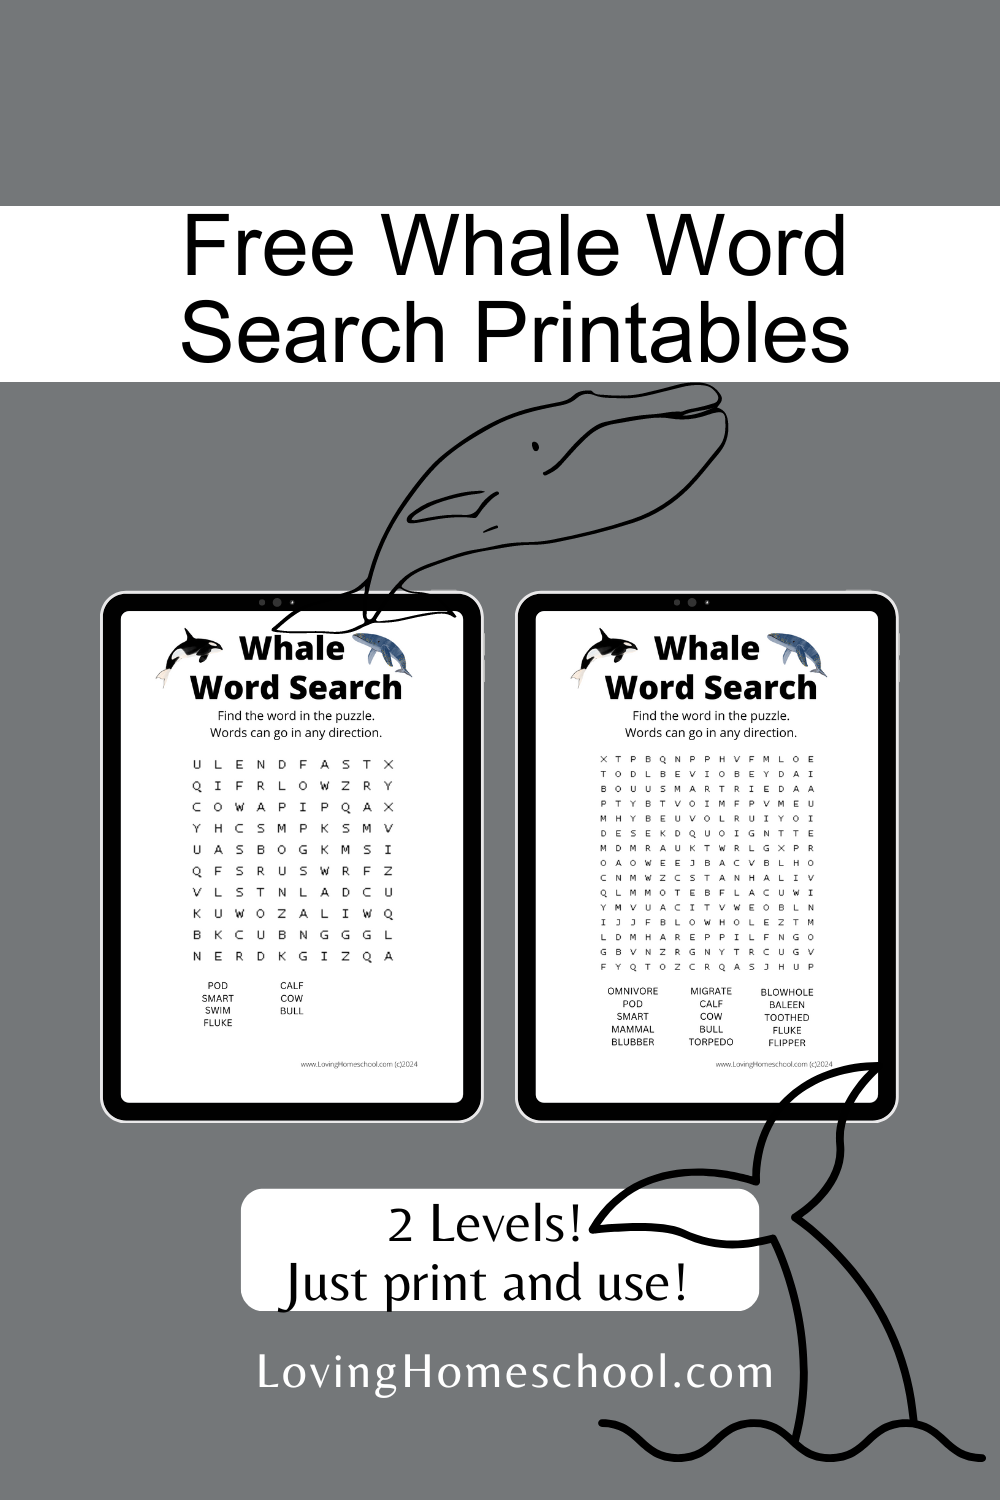 Free Whale Word Search Printables Pinterest Pin